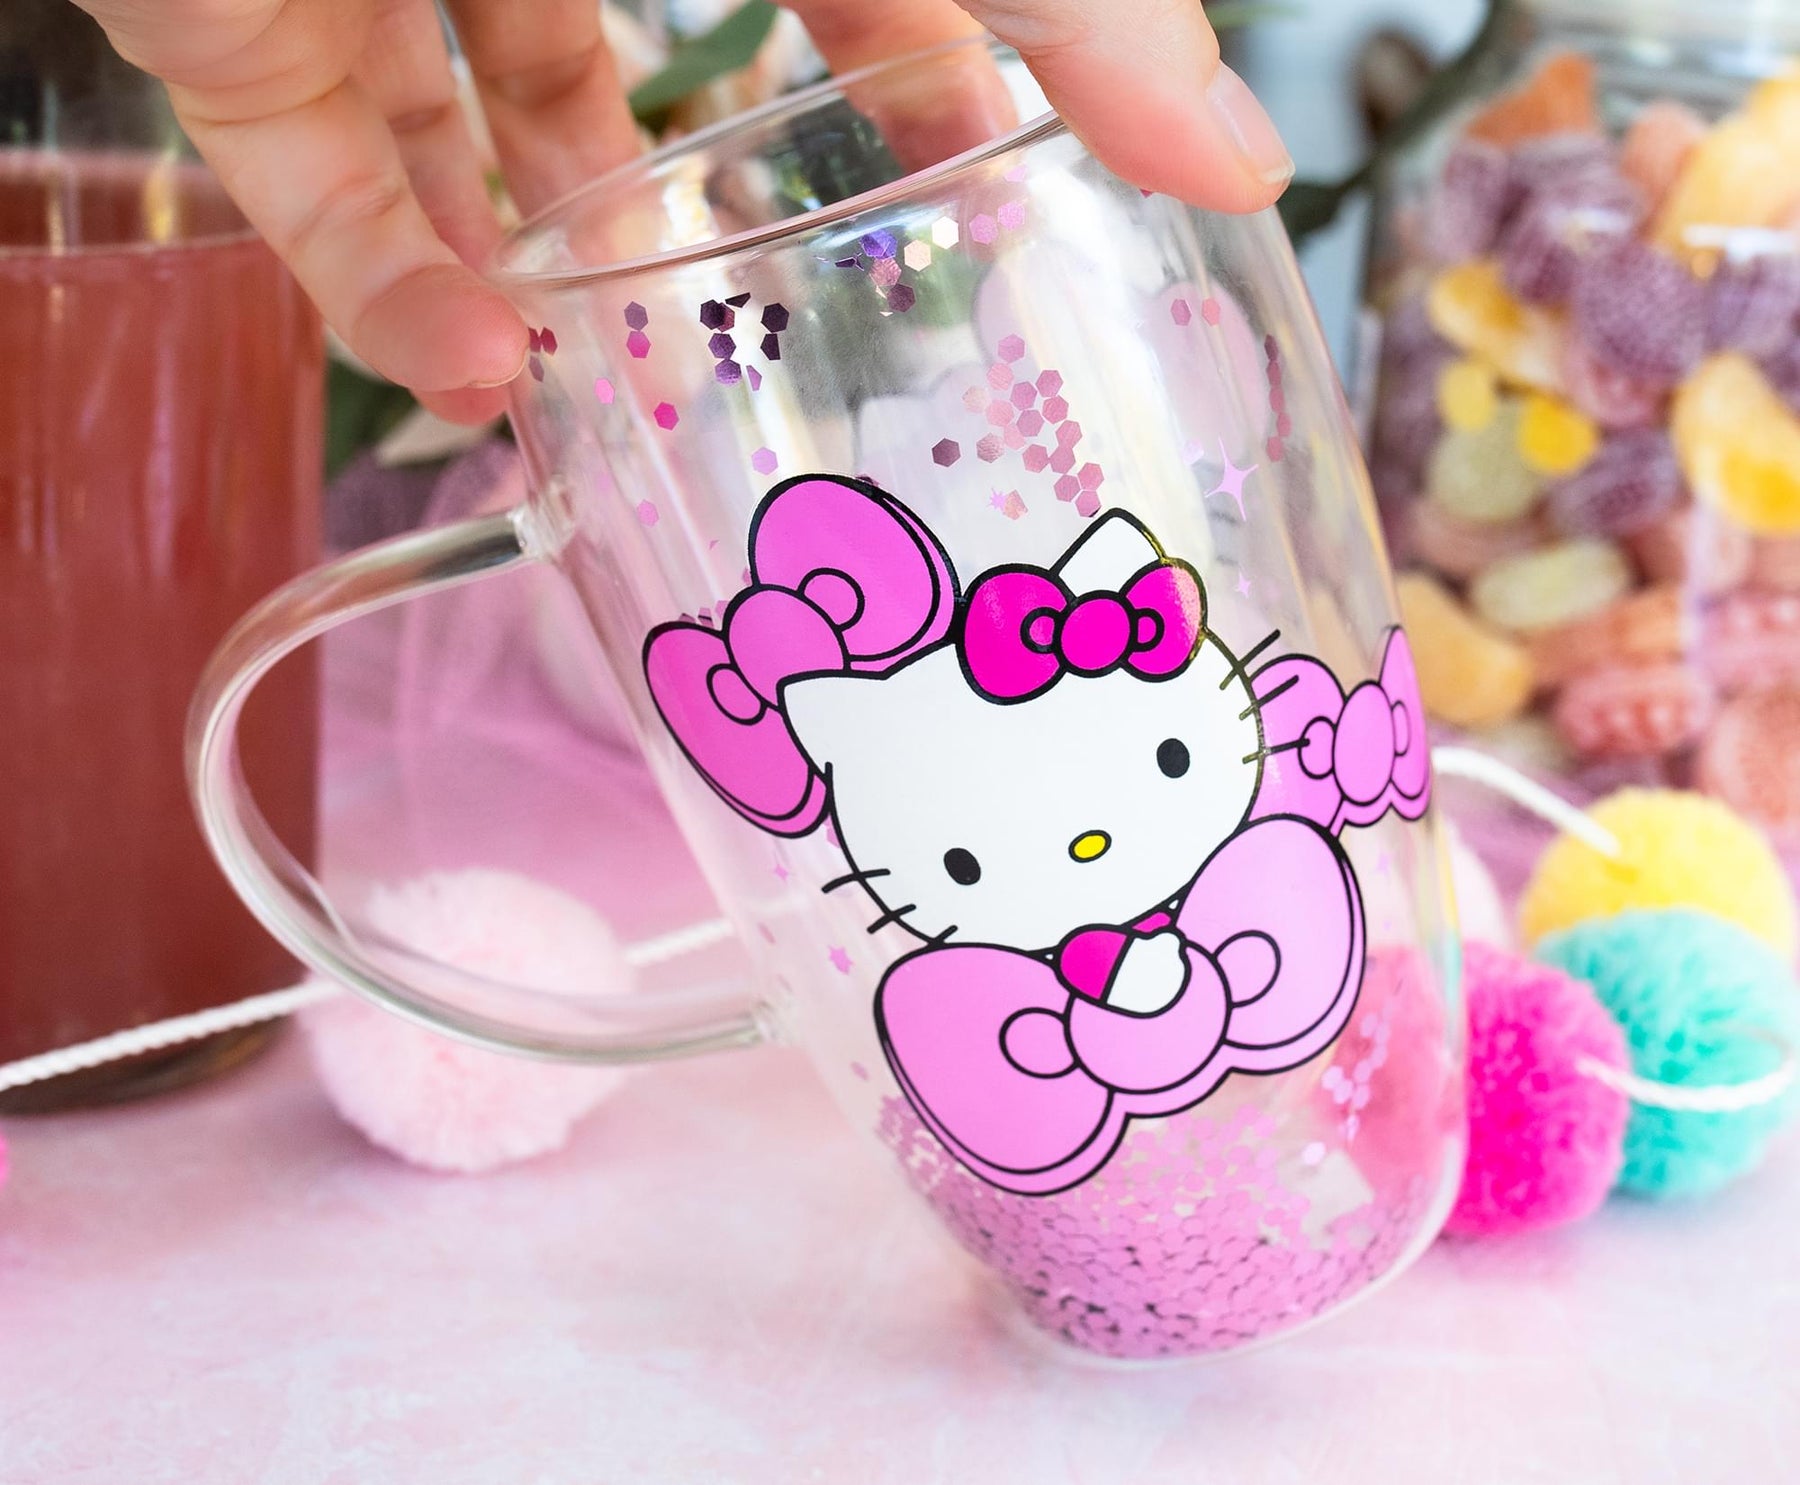 Finally found the other @hellokitty Glass cup with lid & straw at